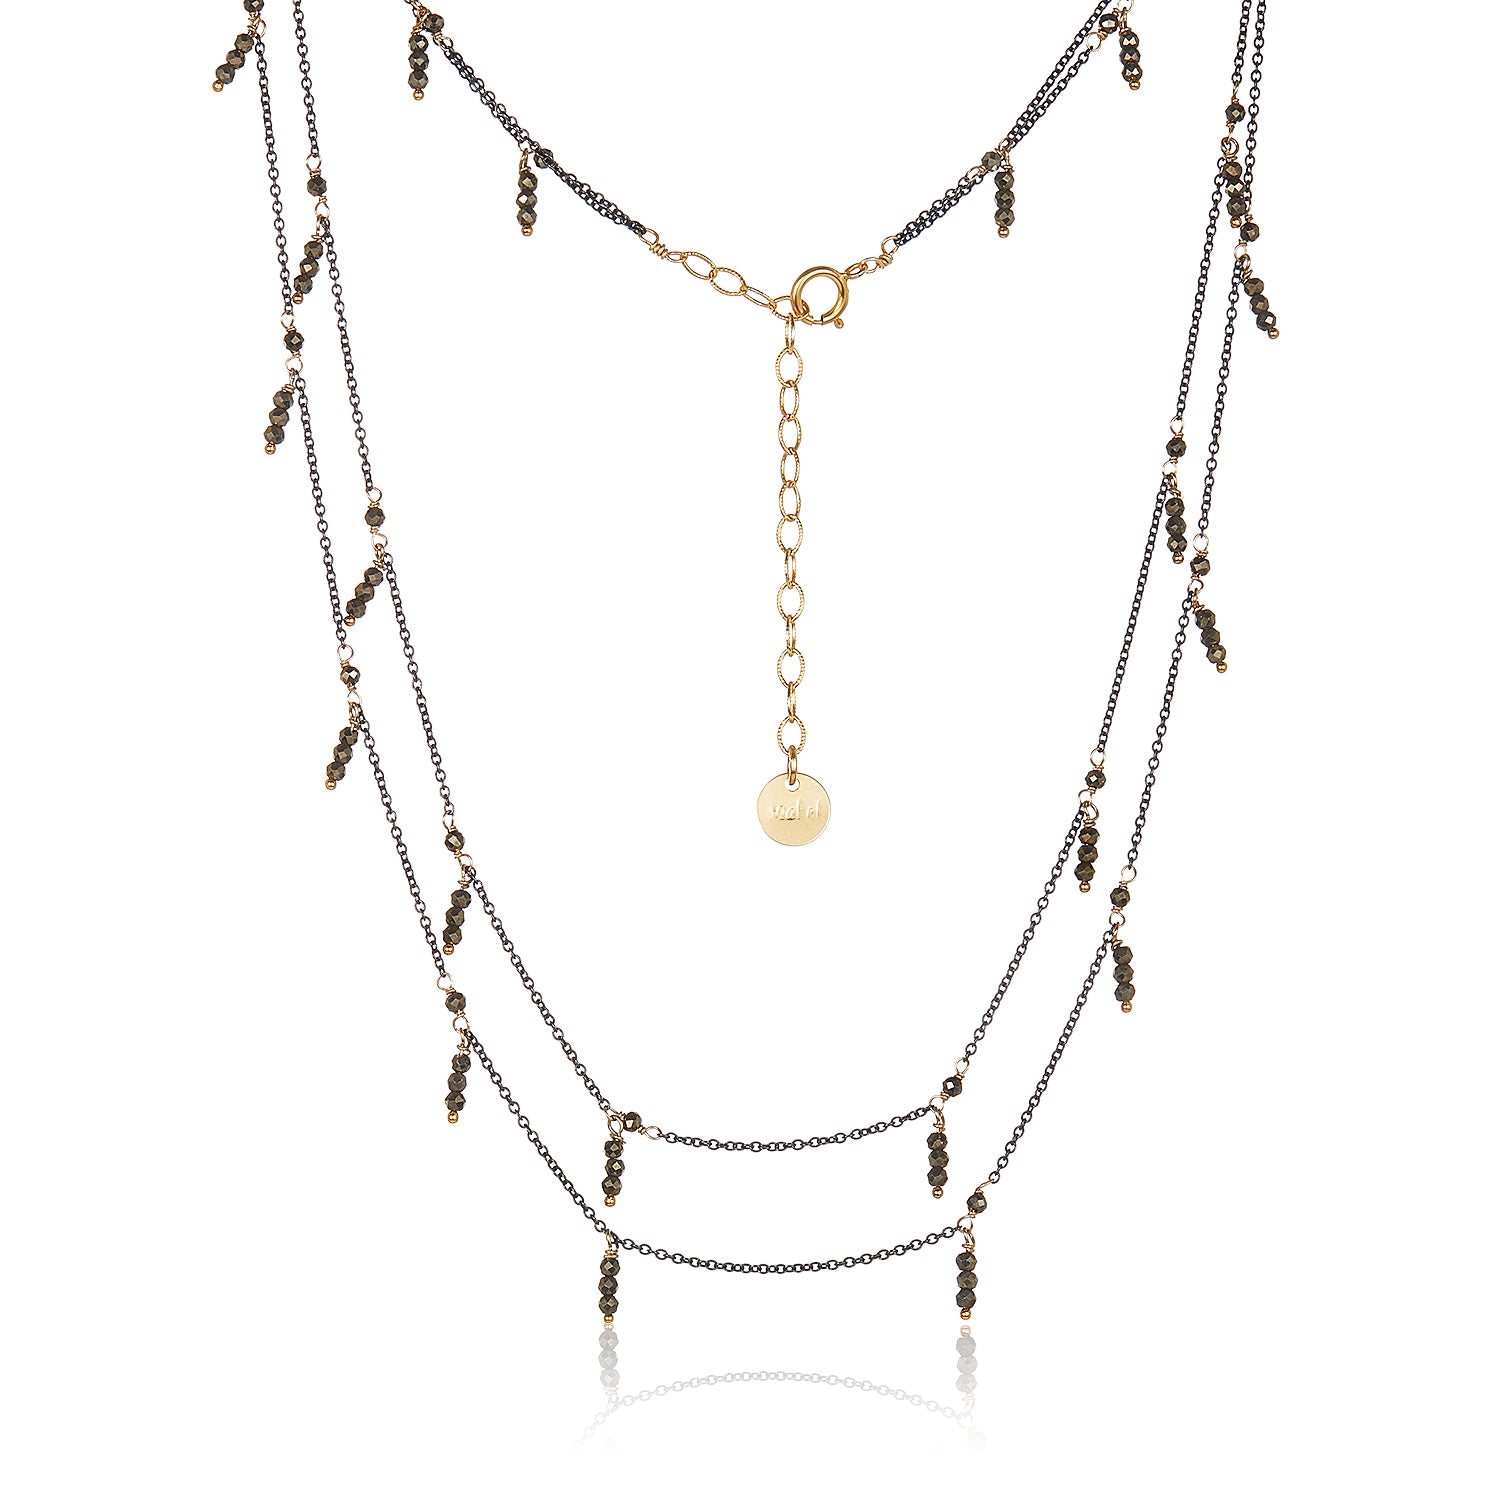 Dangling Double Strand Necklace